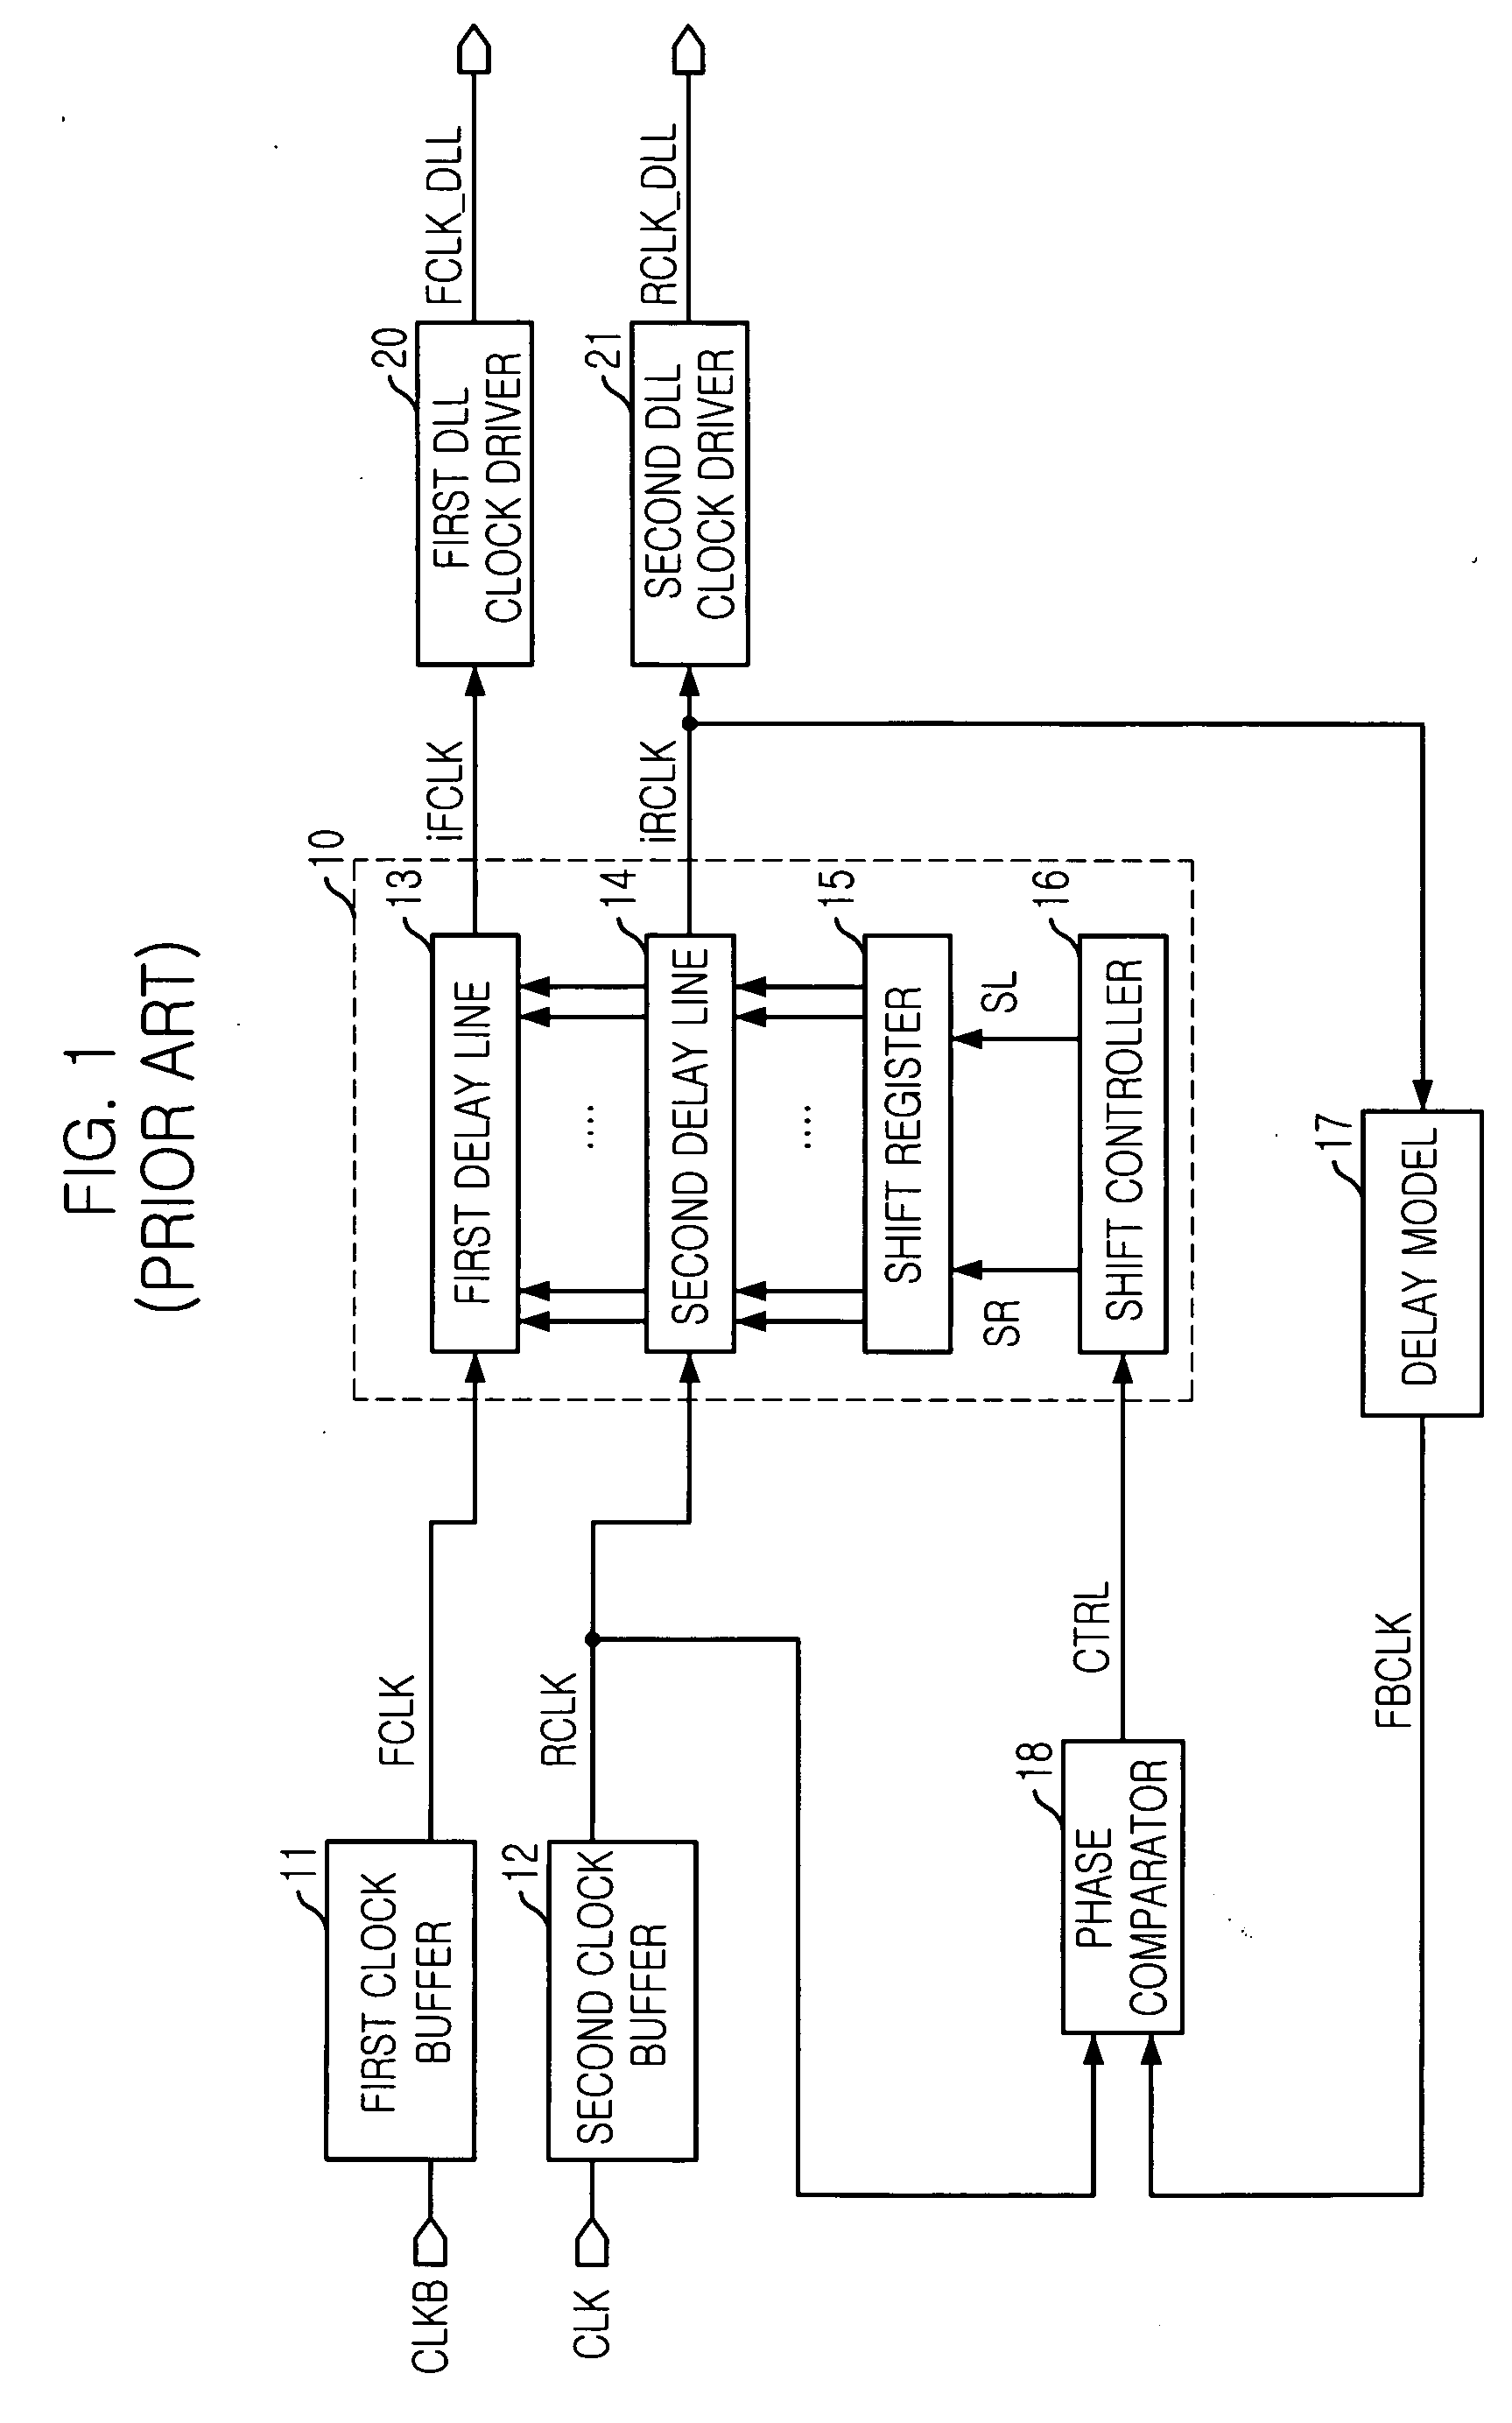 Delay locked loop for controlling duty rate of clock